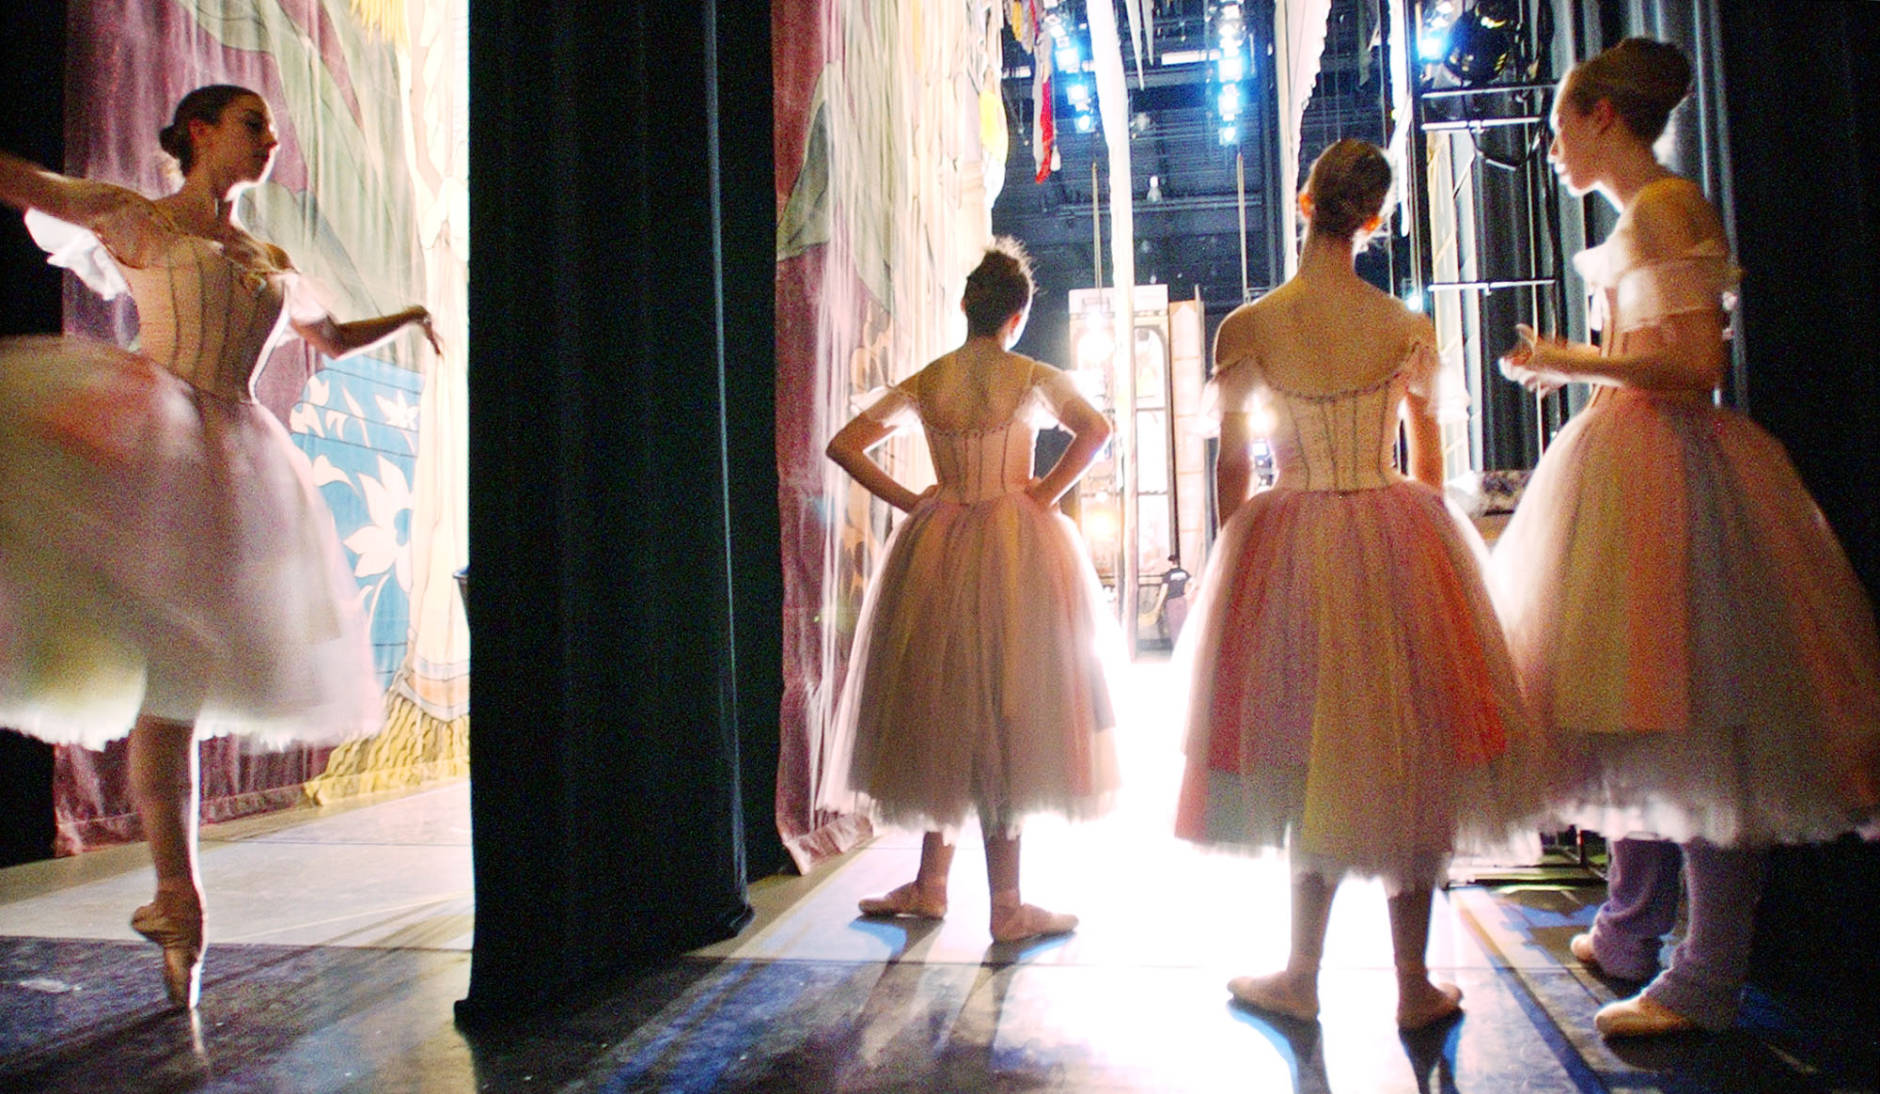 Company dancers wait their turn backstage at a rehersal of Pacific Northwest Ballet's 20th anniversary of ''The Nutcracker,'' Wednesday, Nov. 26, 2003, in Seattle. The Nutcracker opens Friday, Nov. 28, and runs through Dec. 28 at the new McCaw Hall. Over 250 ballet students and 50 company dancers are included in three casts during the 33 performance run. (AP Photo/Elaine Thompson)